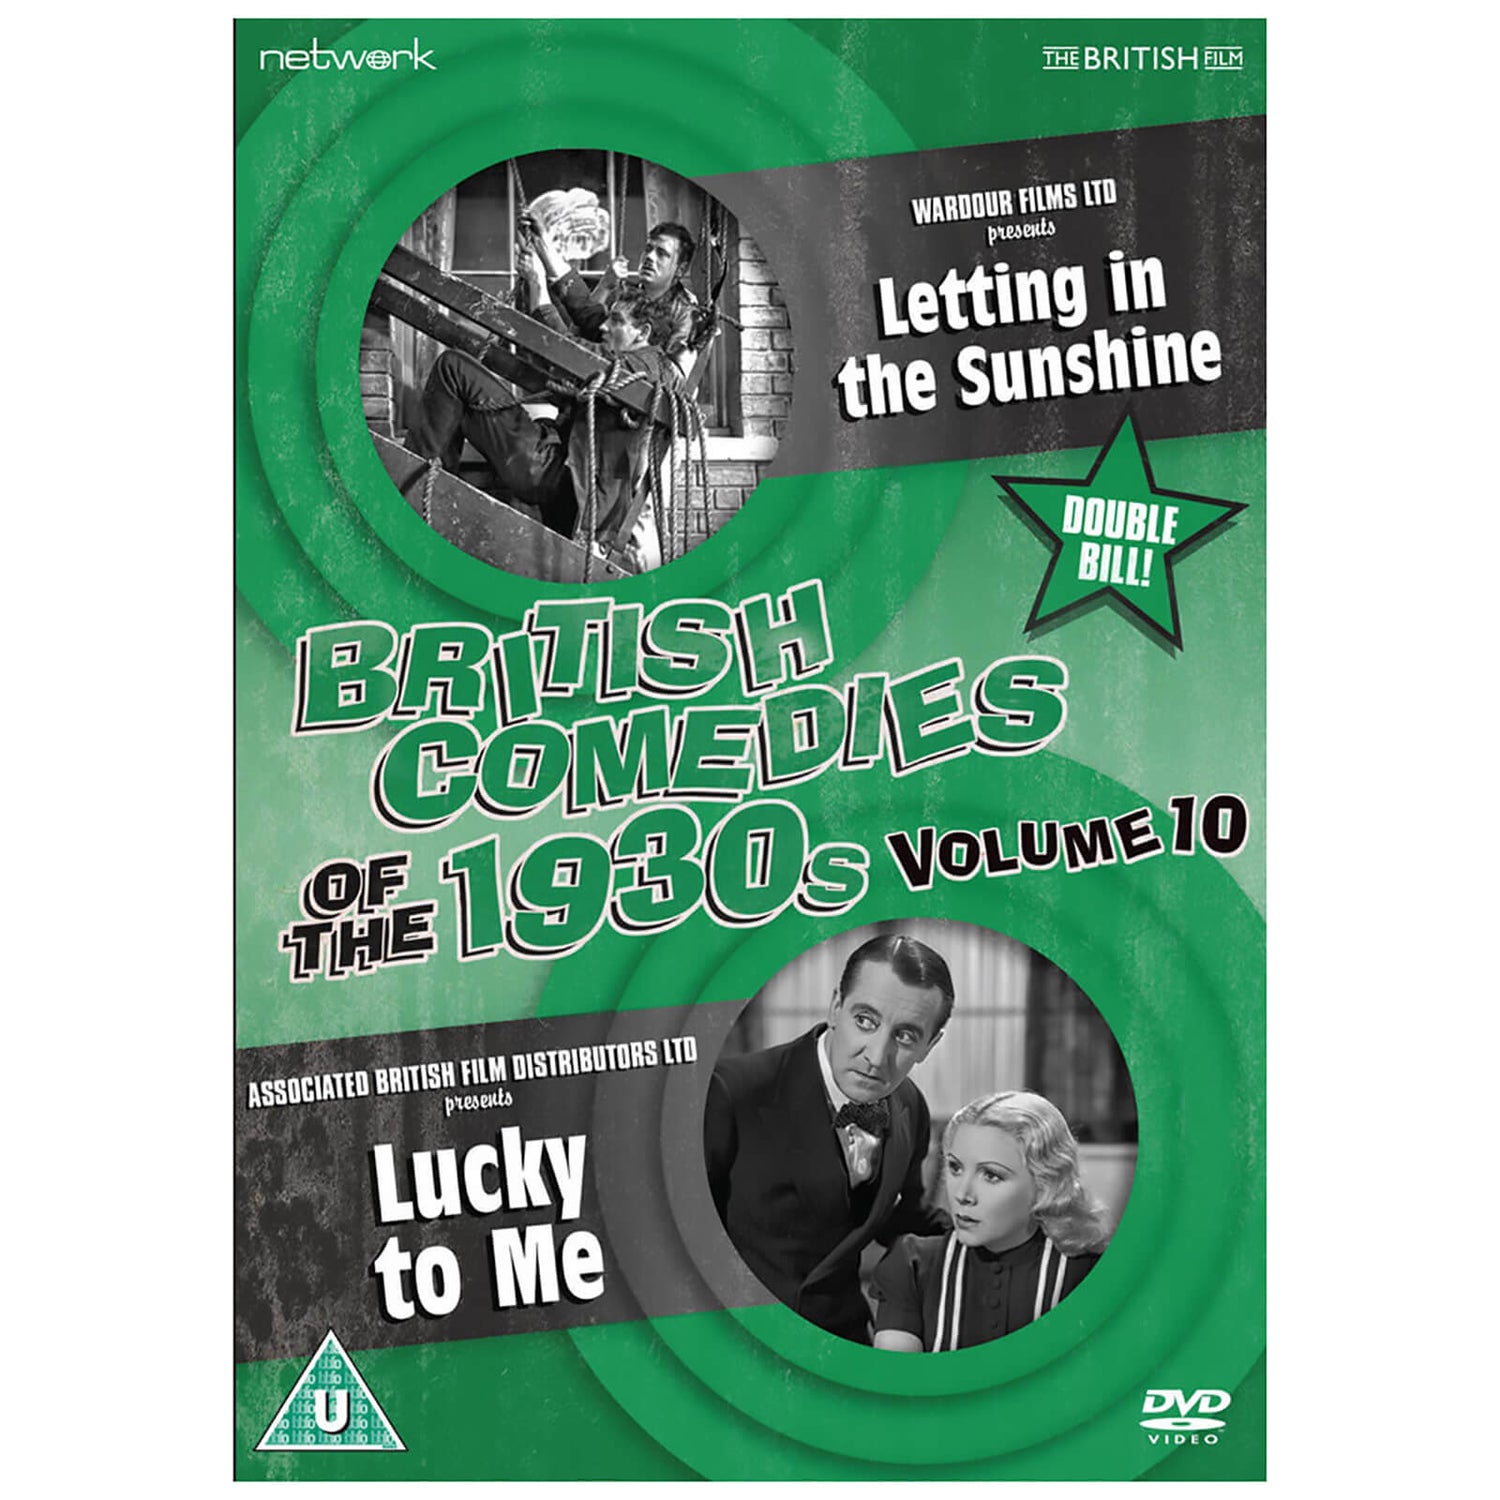 British Comedies of the 1930s Vol. 10 (Letting in the Sunshine/Lucky to Me)